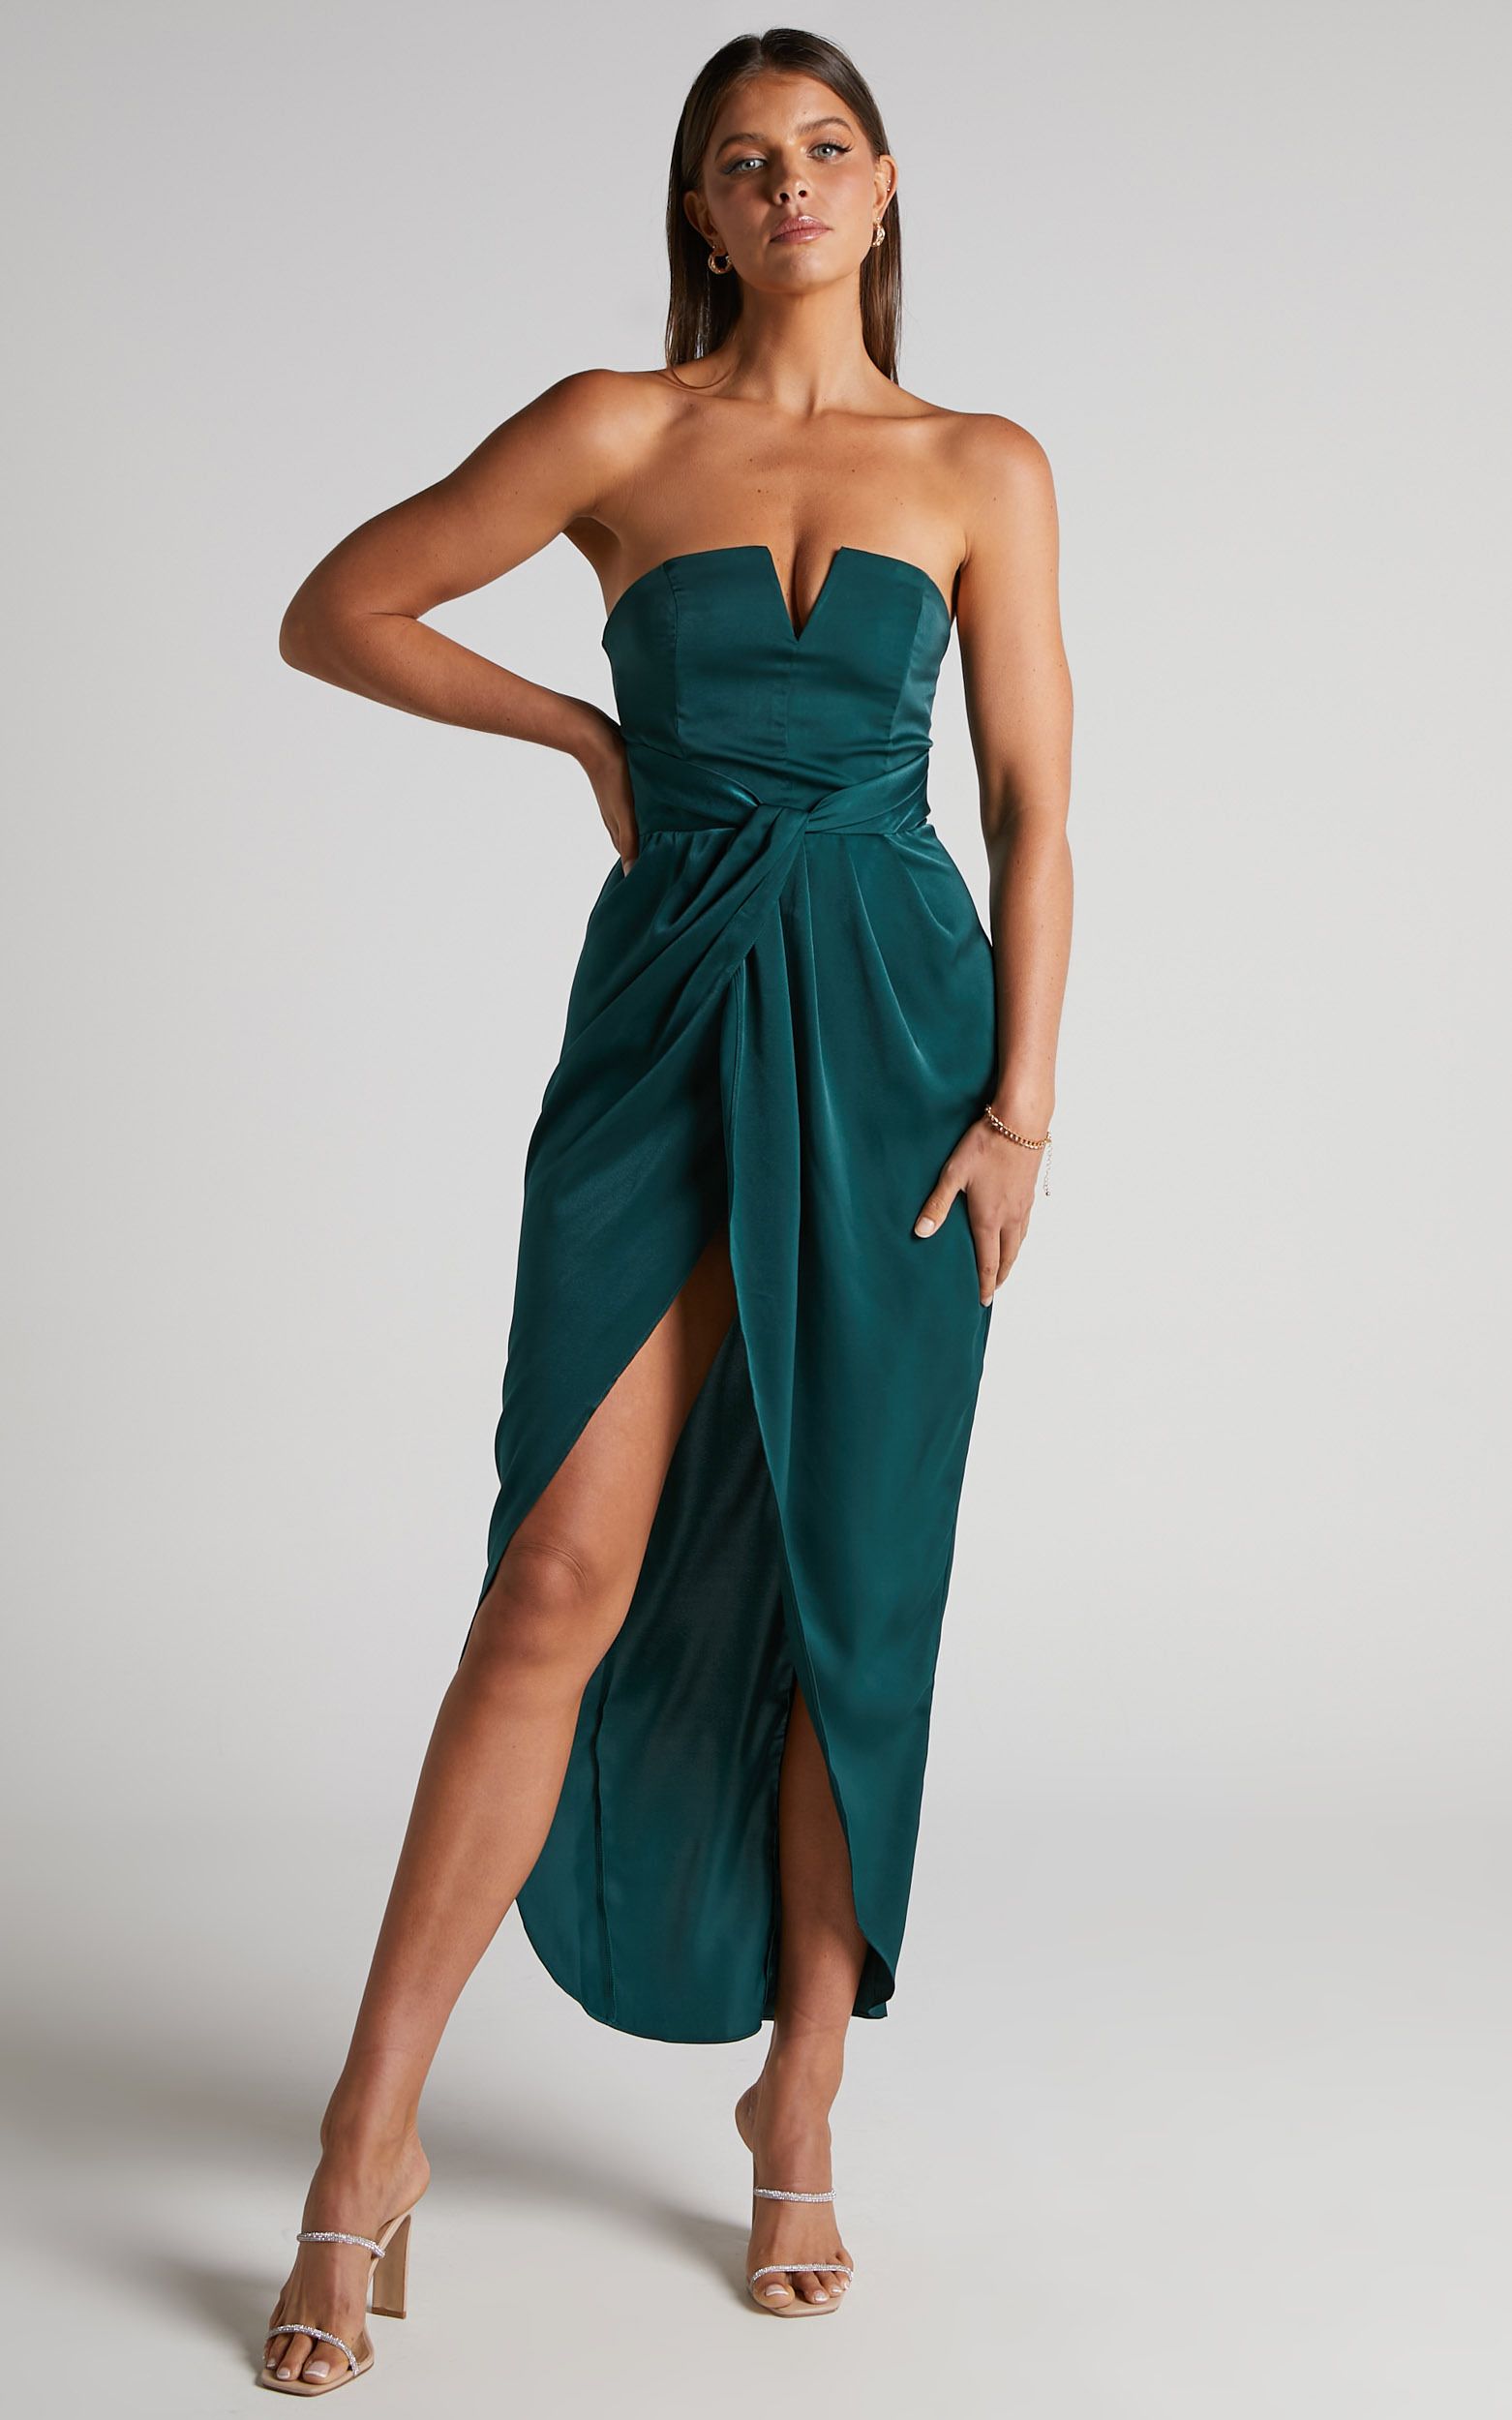 Strapless Maxi Dress Outfit
  Ideas for Ladies